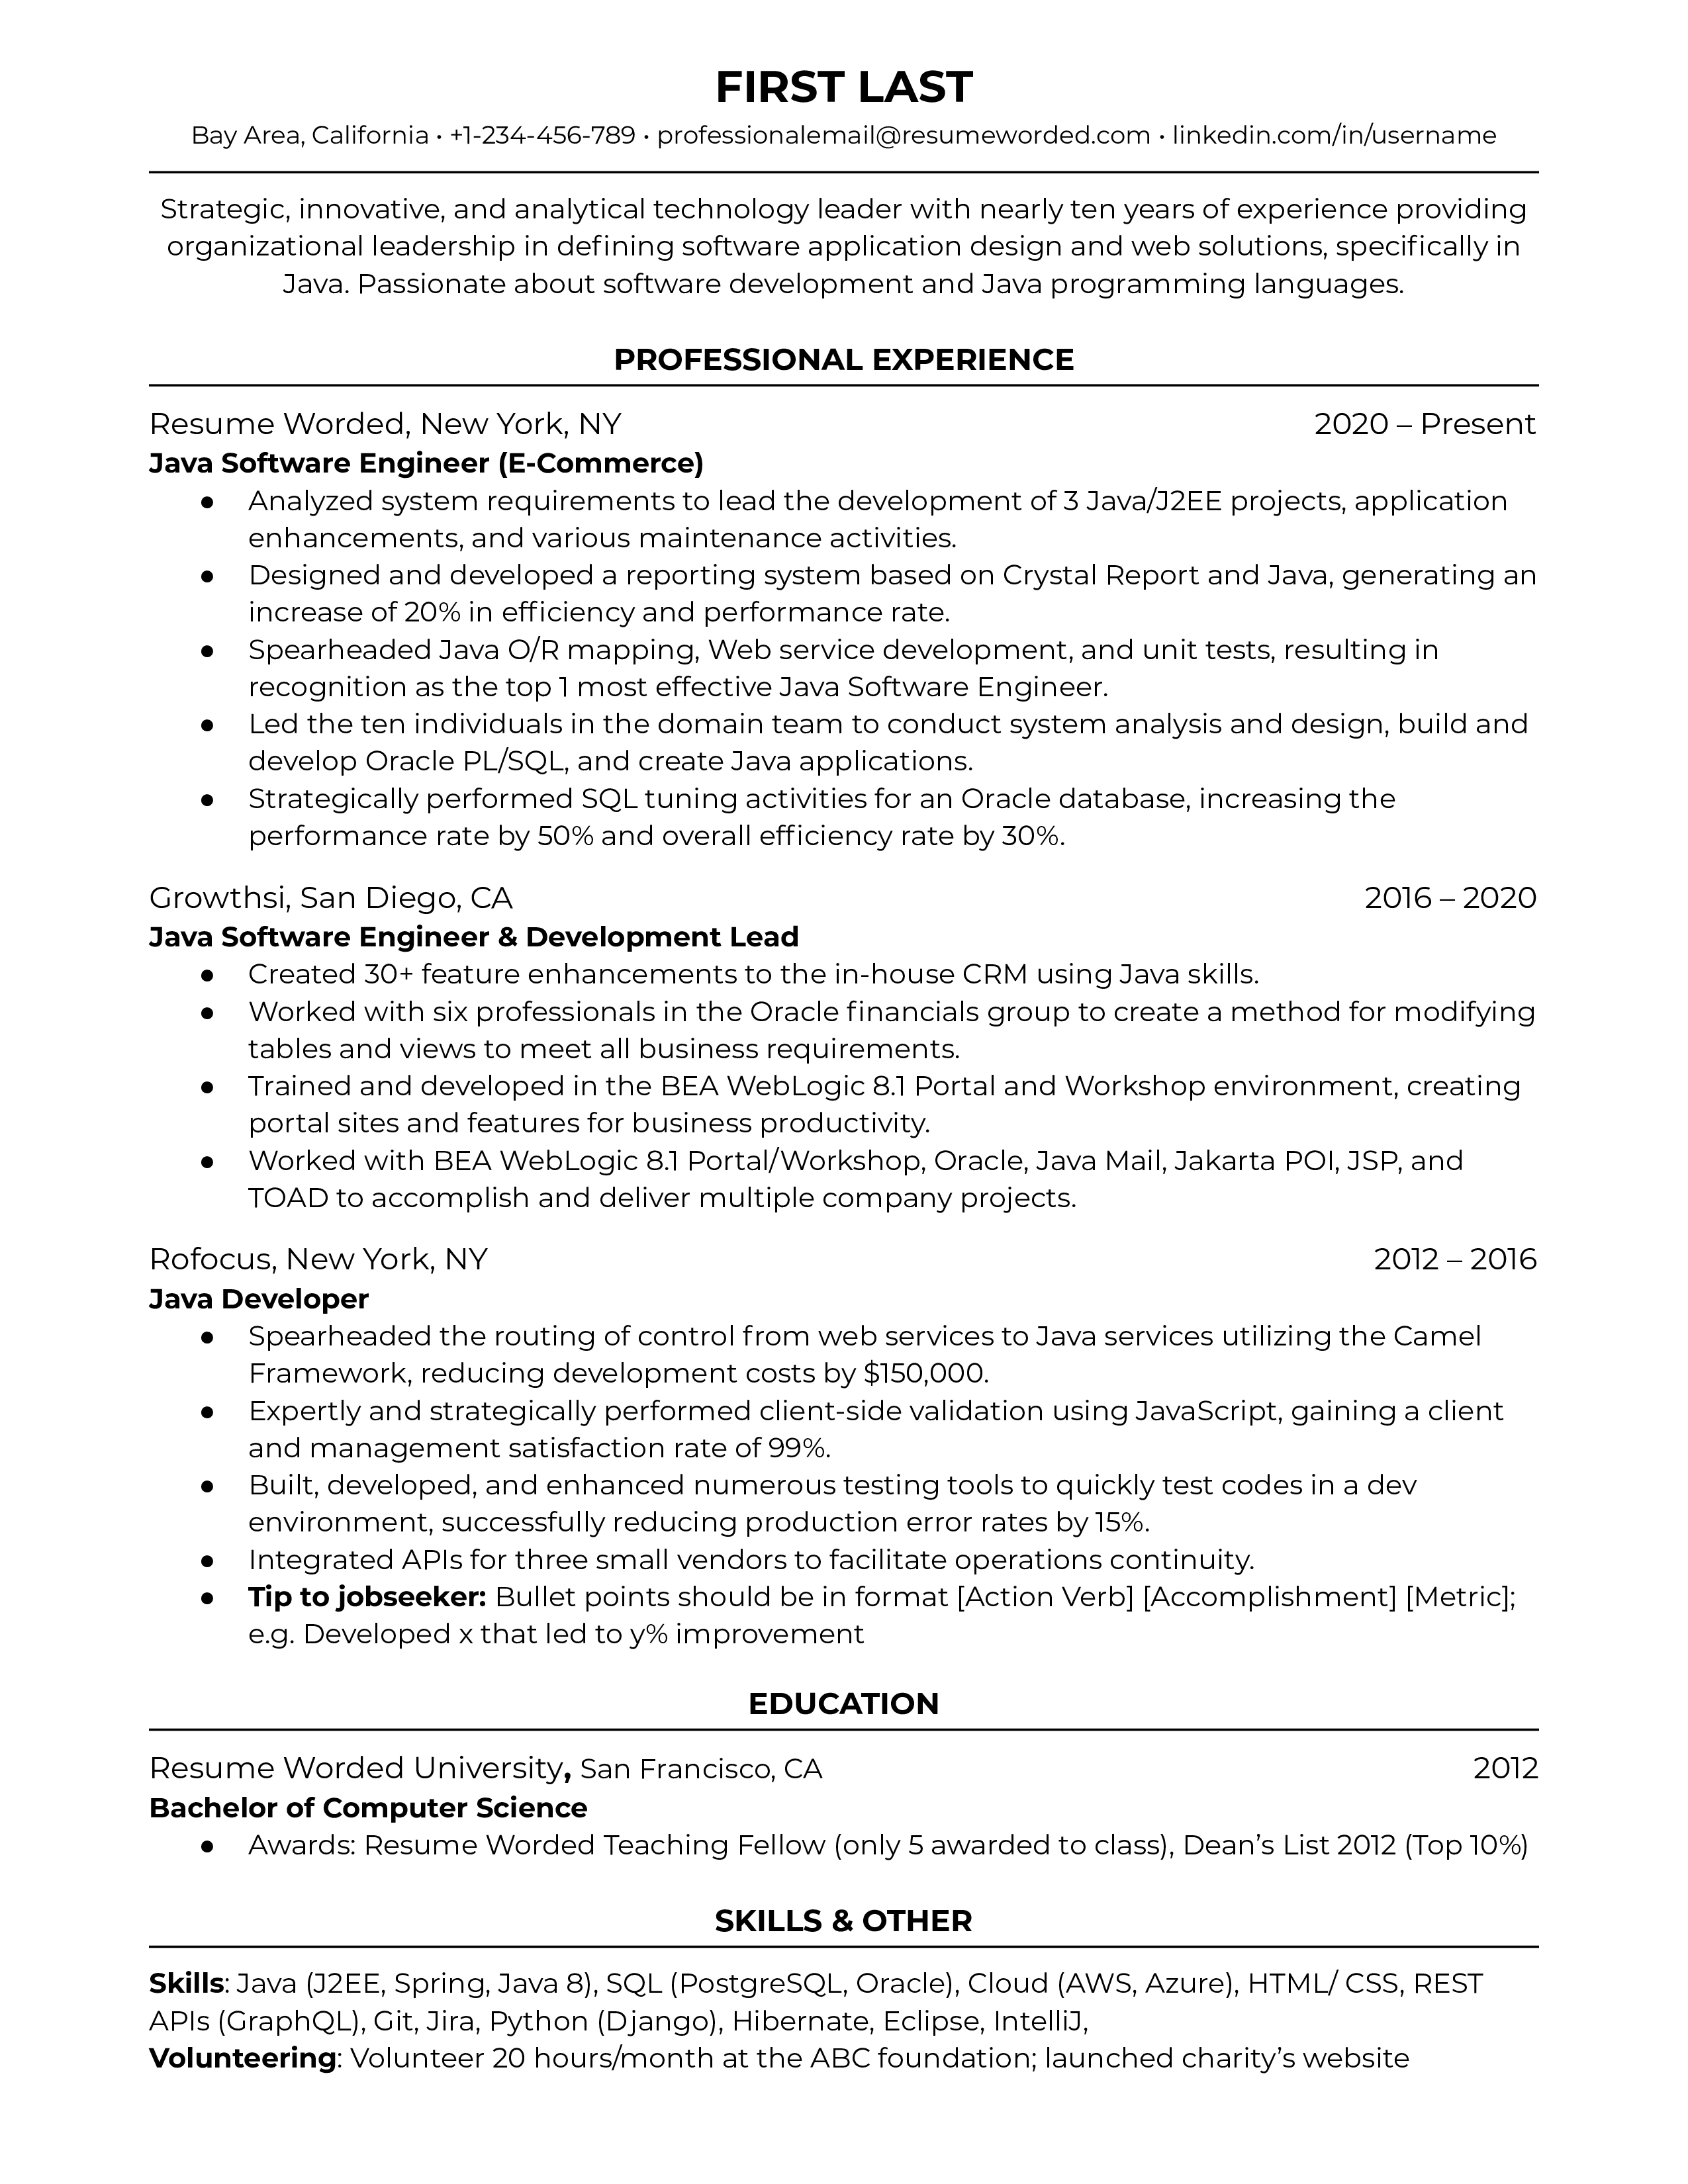 Java software engineering resume example which highlights Java software development experience